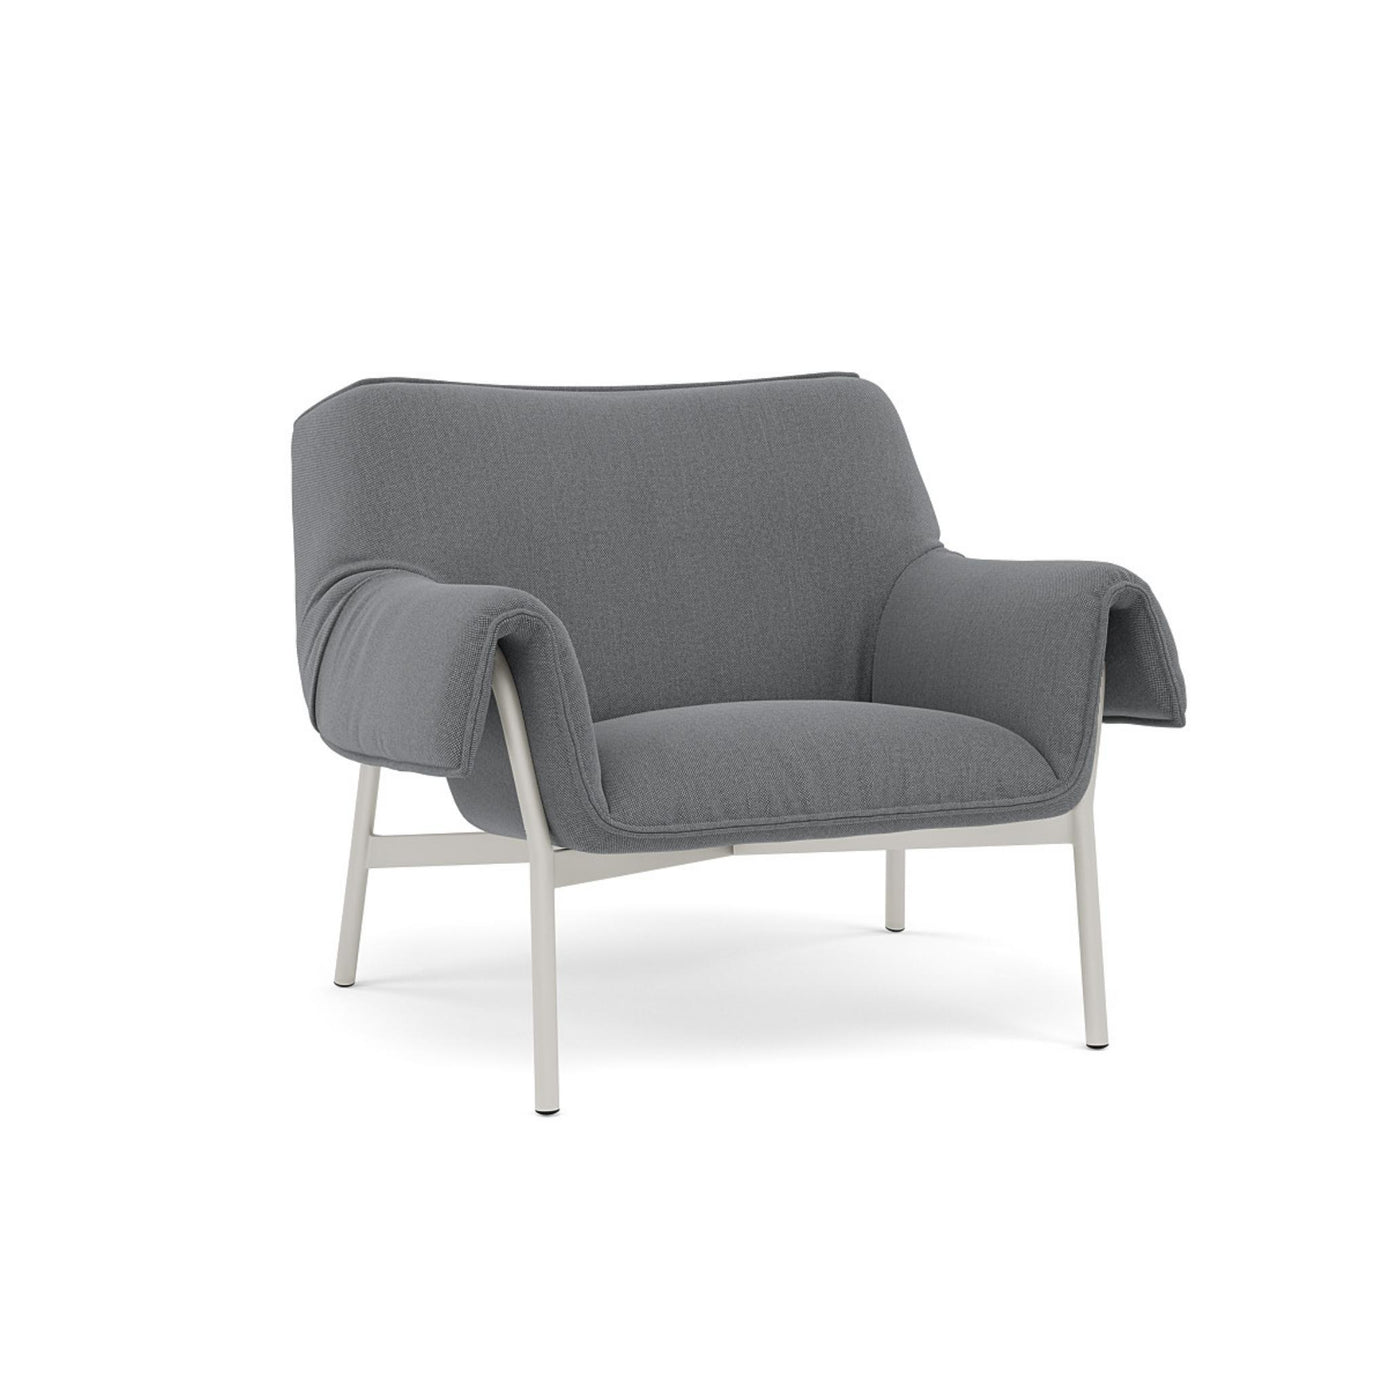 Muuto Wrap Lounge Chair. Made to order from someday designs. #colour_re-wool-158